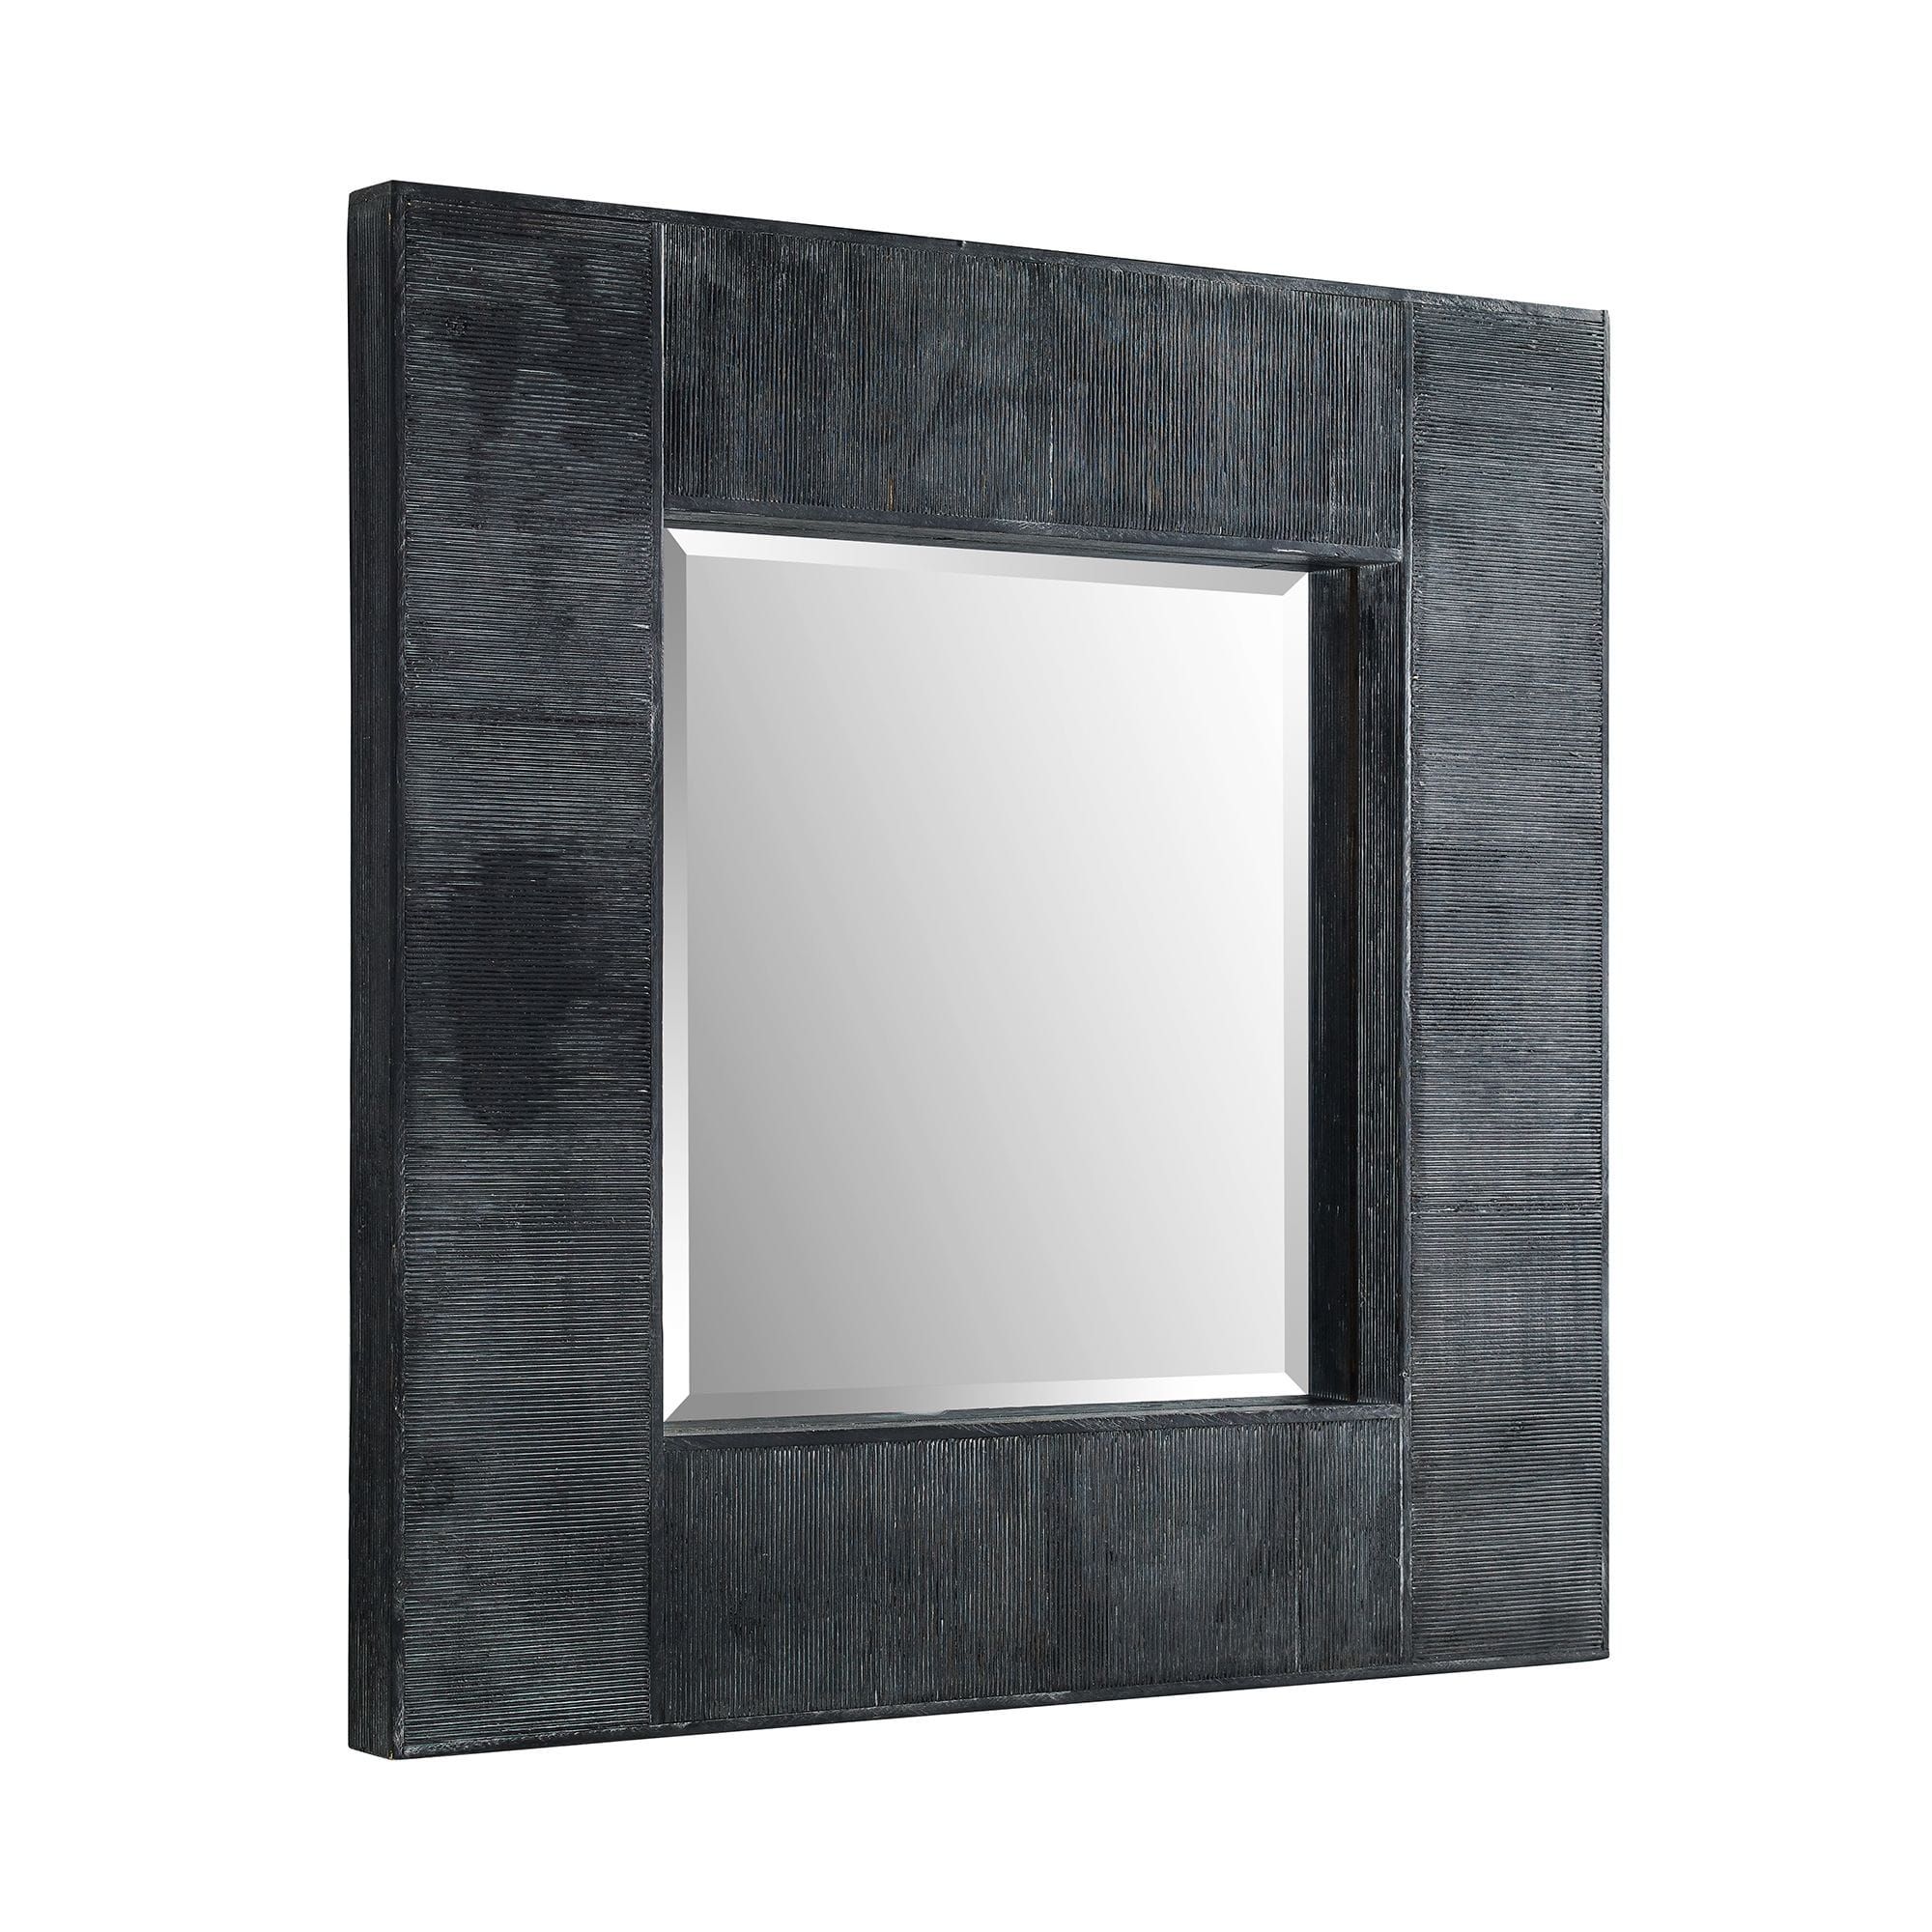 32 Inch Modern Industrial Square Wall Mirrorwalker Edison Inside Black Square Wall Mirrors (View 11 of 15)